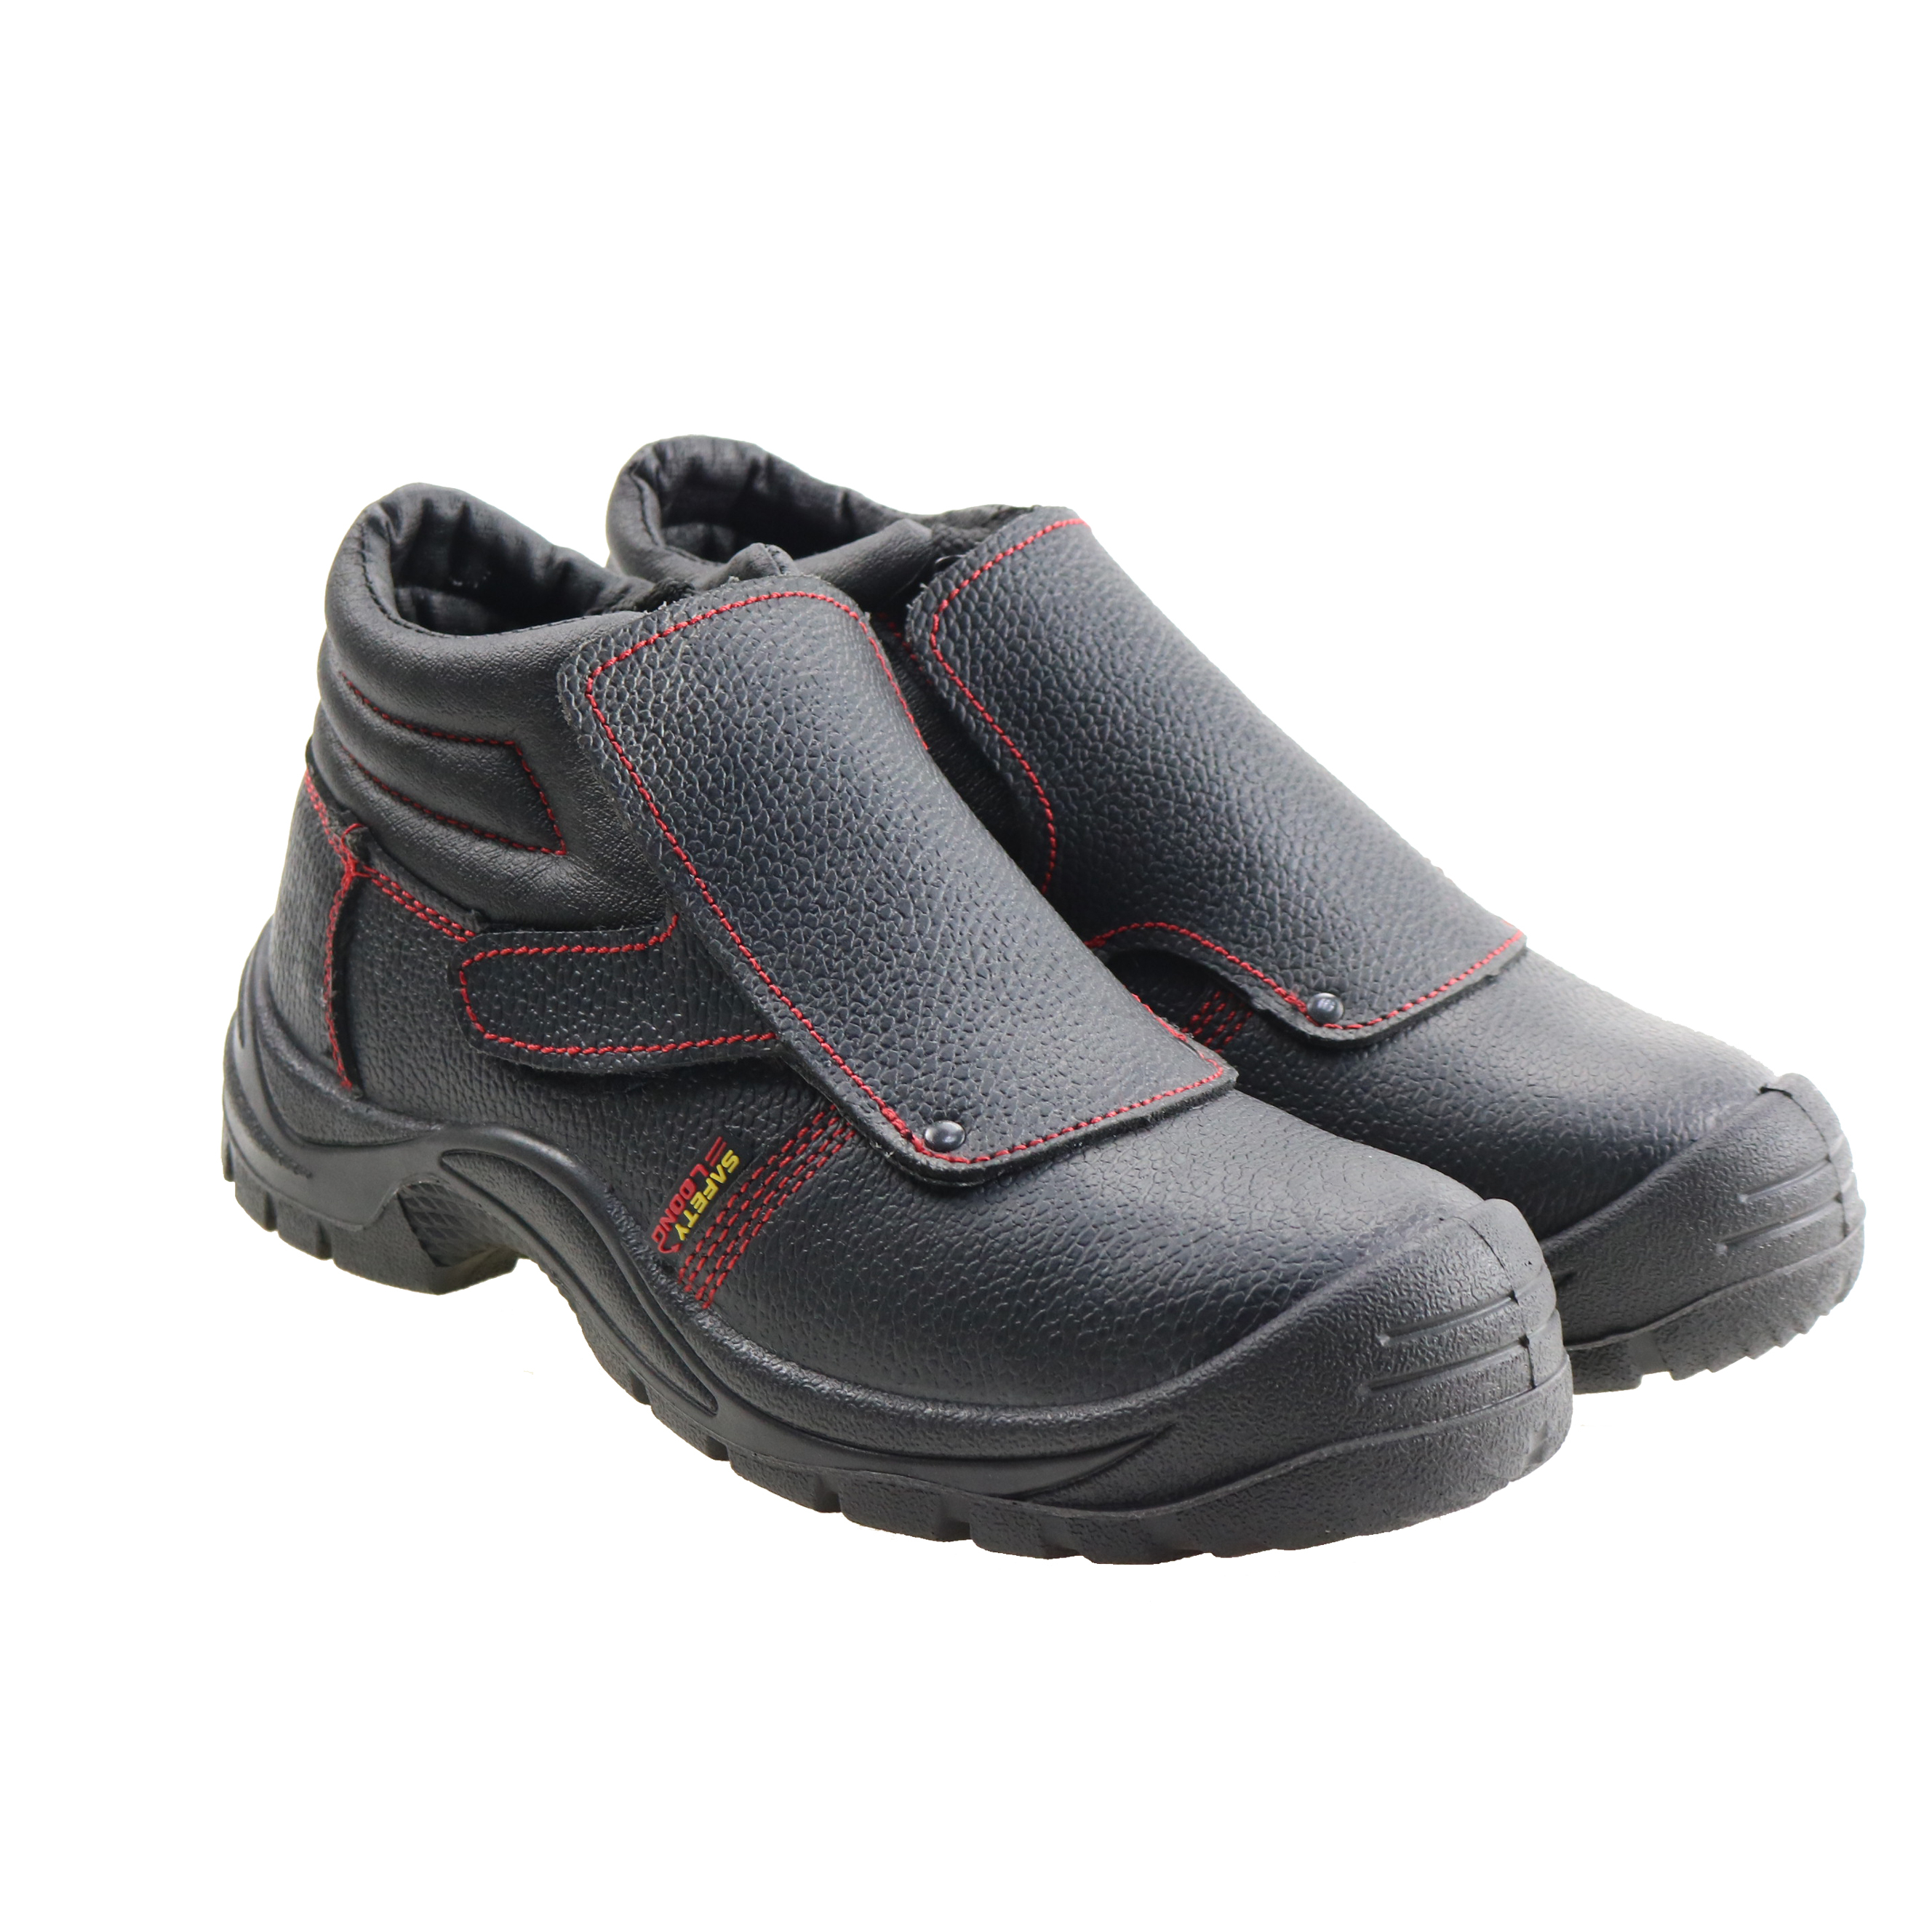 Waterproof Non-Slip Oil Resistance  With Steel Toe  Safety Shoes For Men